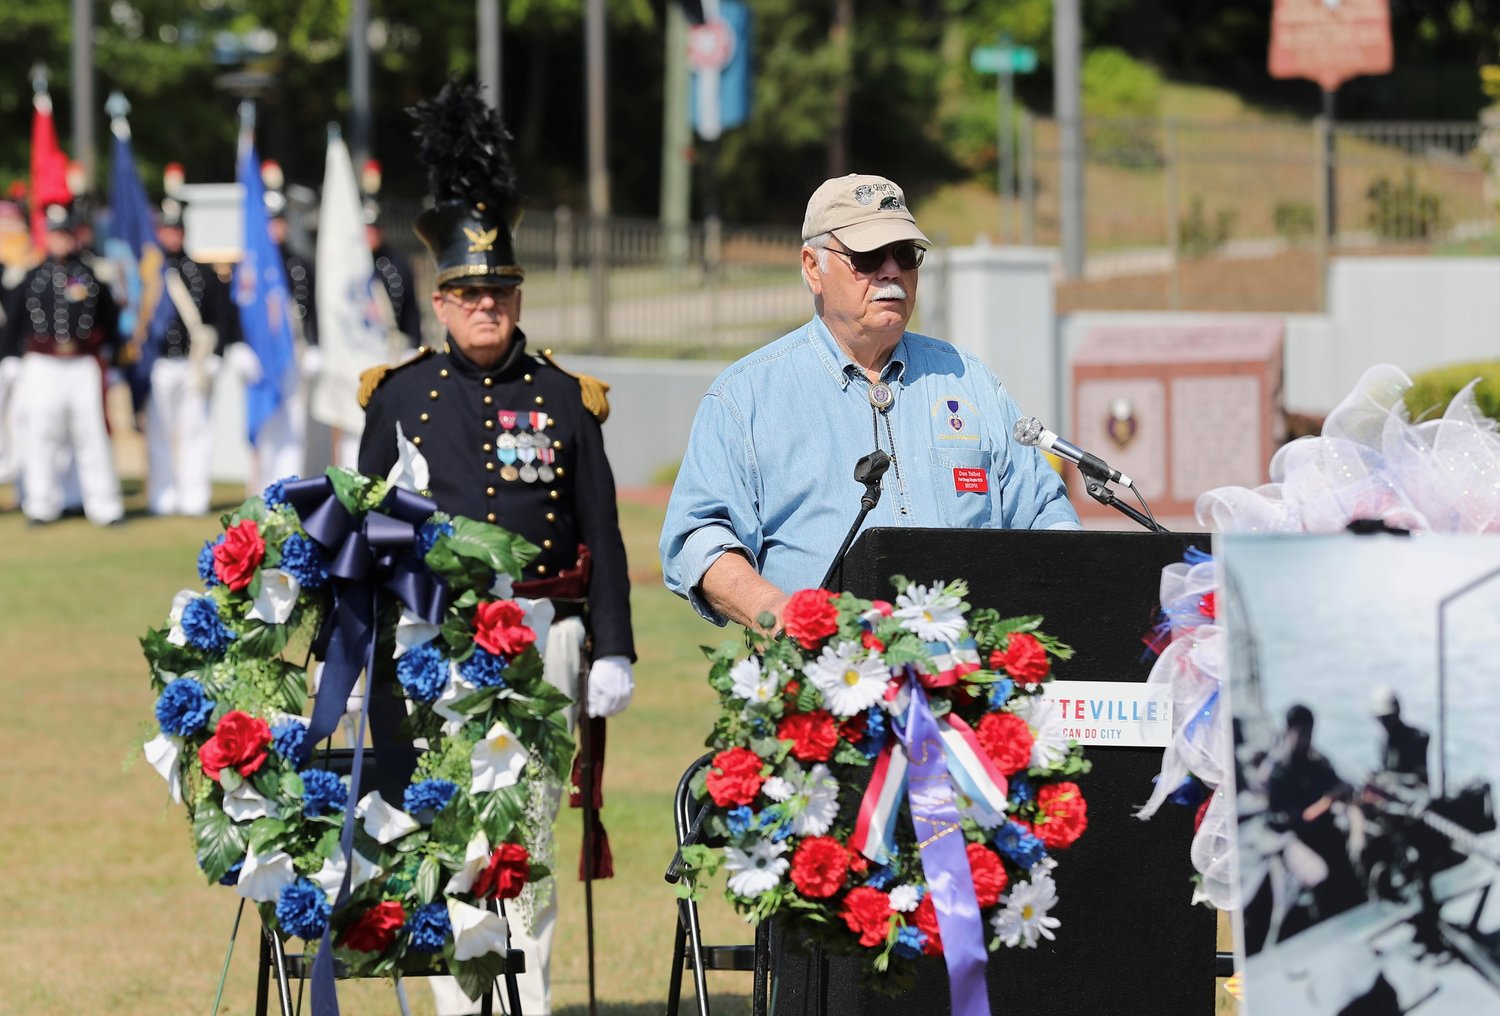 Don Talbot, chairman of the Freedom Memorial Park steering committee, prepares for the colors to post during the Memorial Day ceremony at Freedom Memorial Park on Monday.